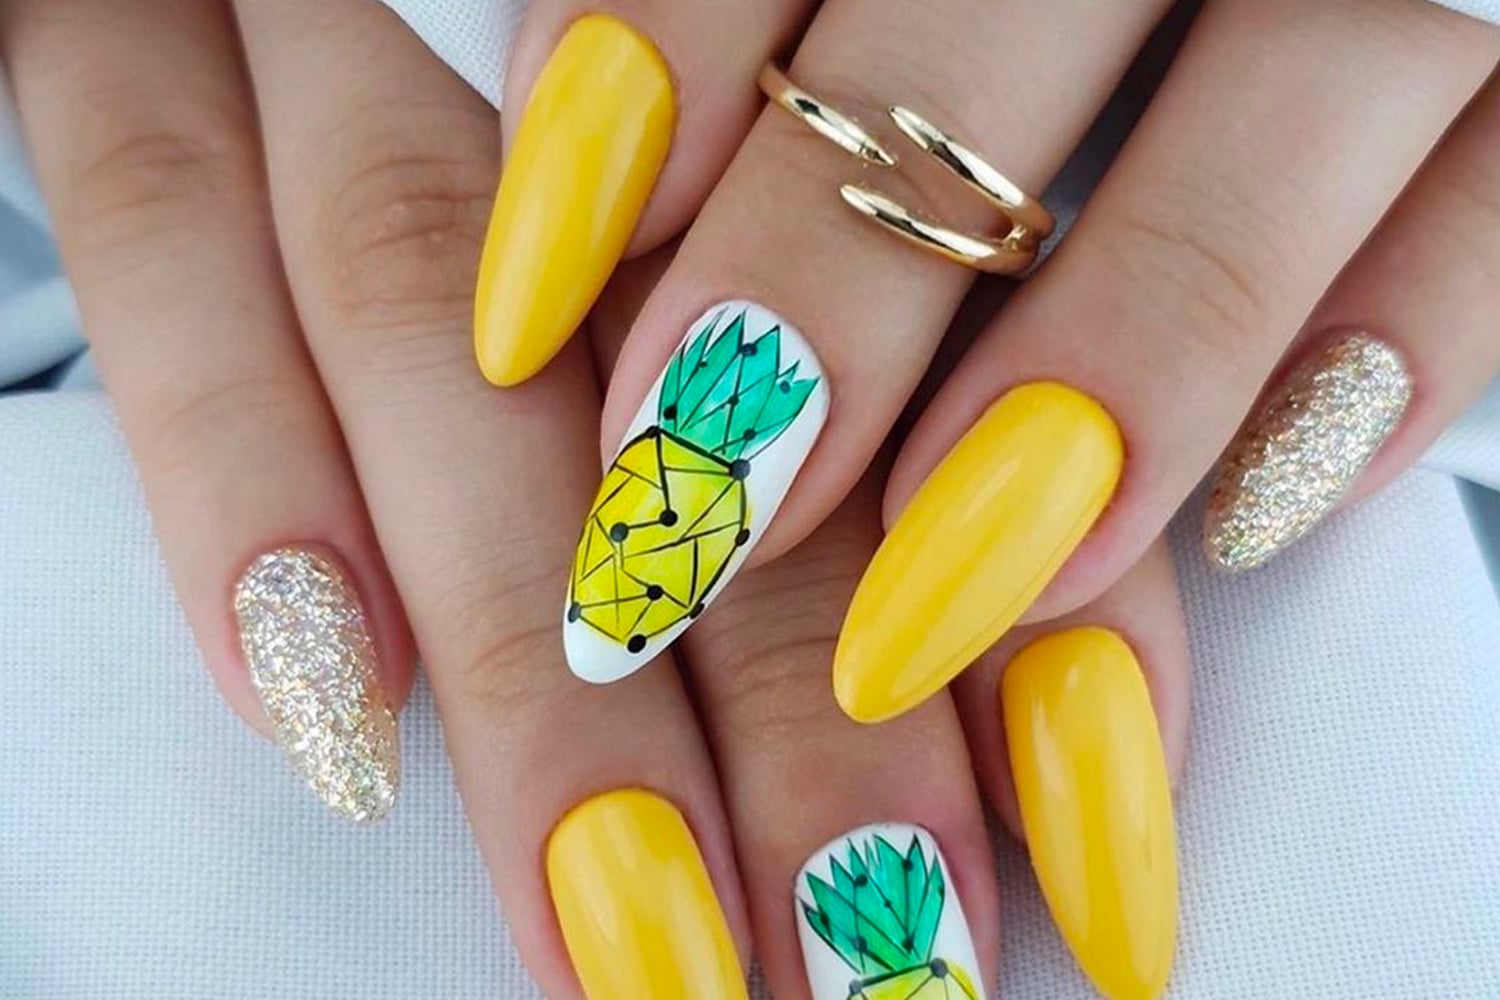 3Pcs Juice Lemon Nail Stickers 3D Adhesive Sliders Fruits Strawberry  Pineapple Avocado Nail Art Decals Summer Designs Decoartions Strawberry  Stickers Nail Art Yellow Stickers Nail Decals Colorful Fruit Manicure(A)